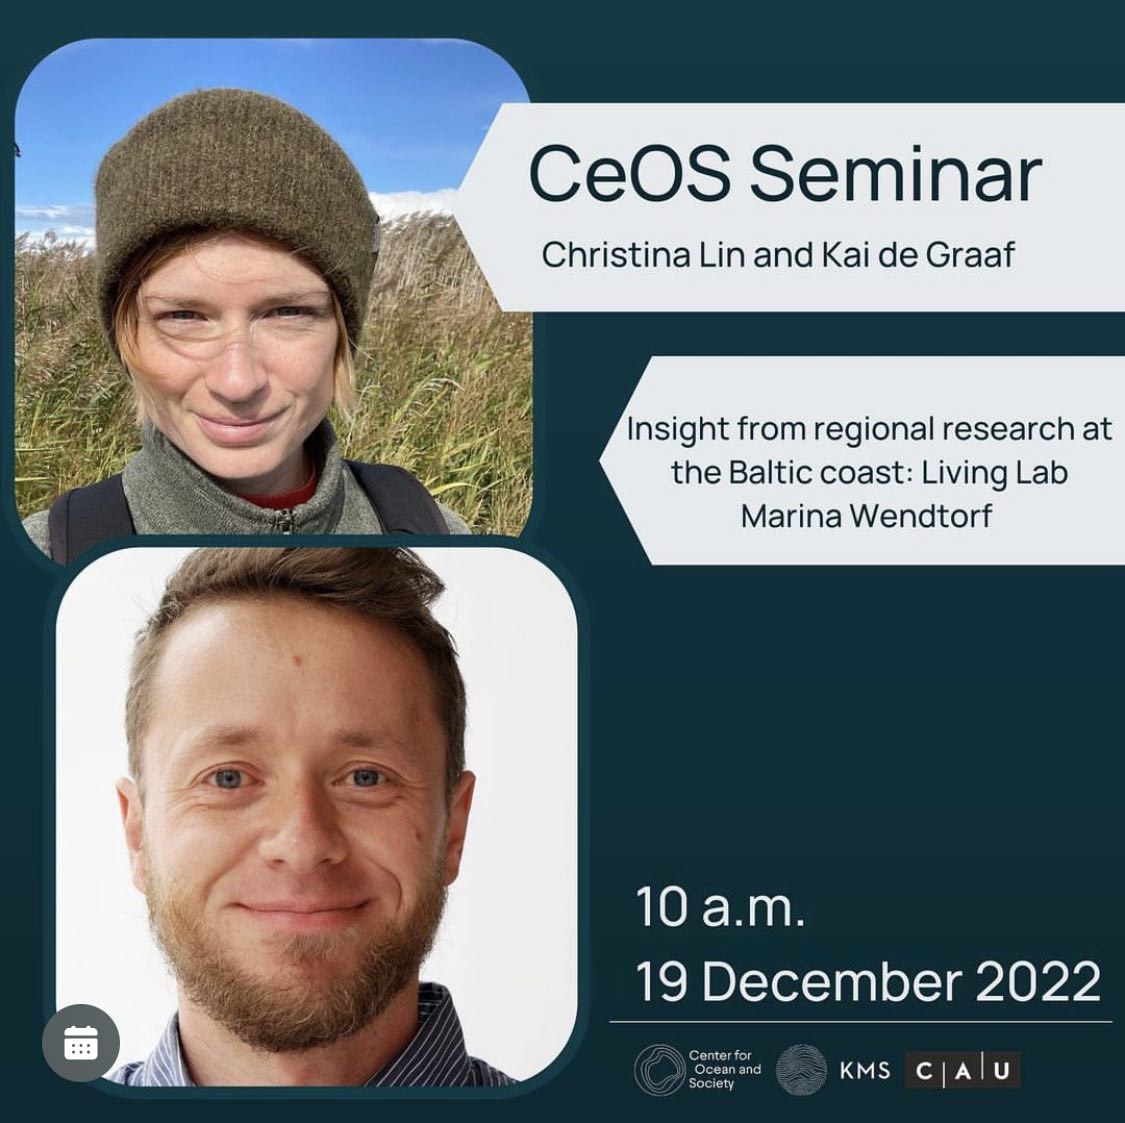 Follow us to Kiel Bay and learn about #LivingLab and #CostalProtection in our next #CeOS seminar, 19th Dec. Christina Lin & Kai de Graaf will give insights into their #regional #research #KMS @kieluni Virtually open to everyone! More info: oceanandsociety.org/en/events/ceos